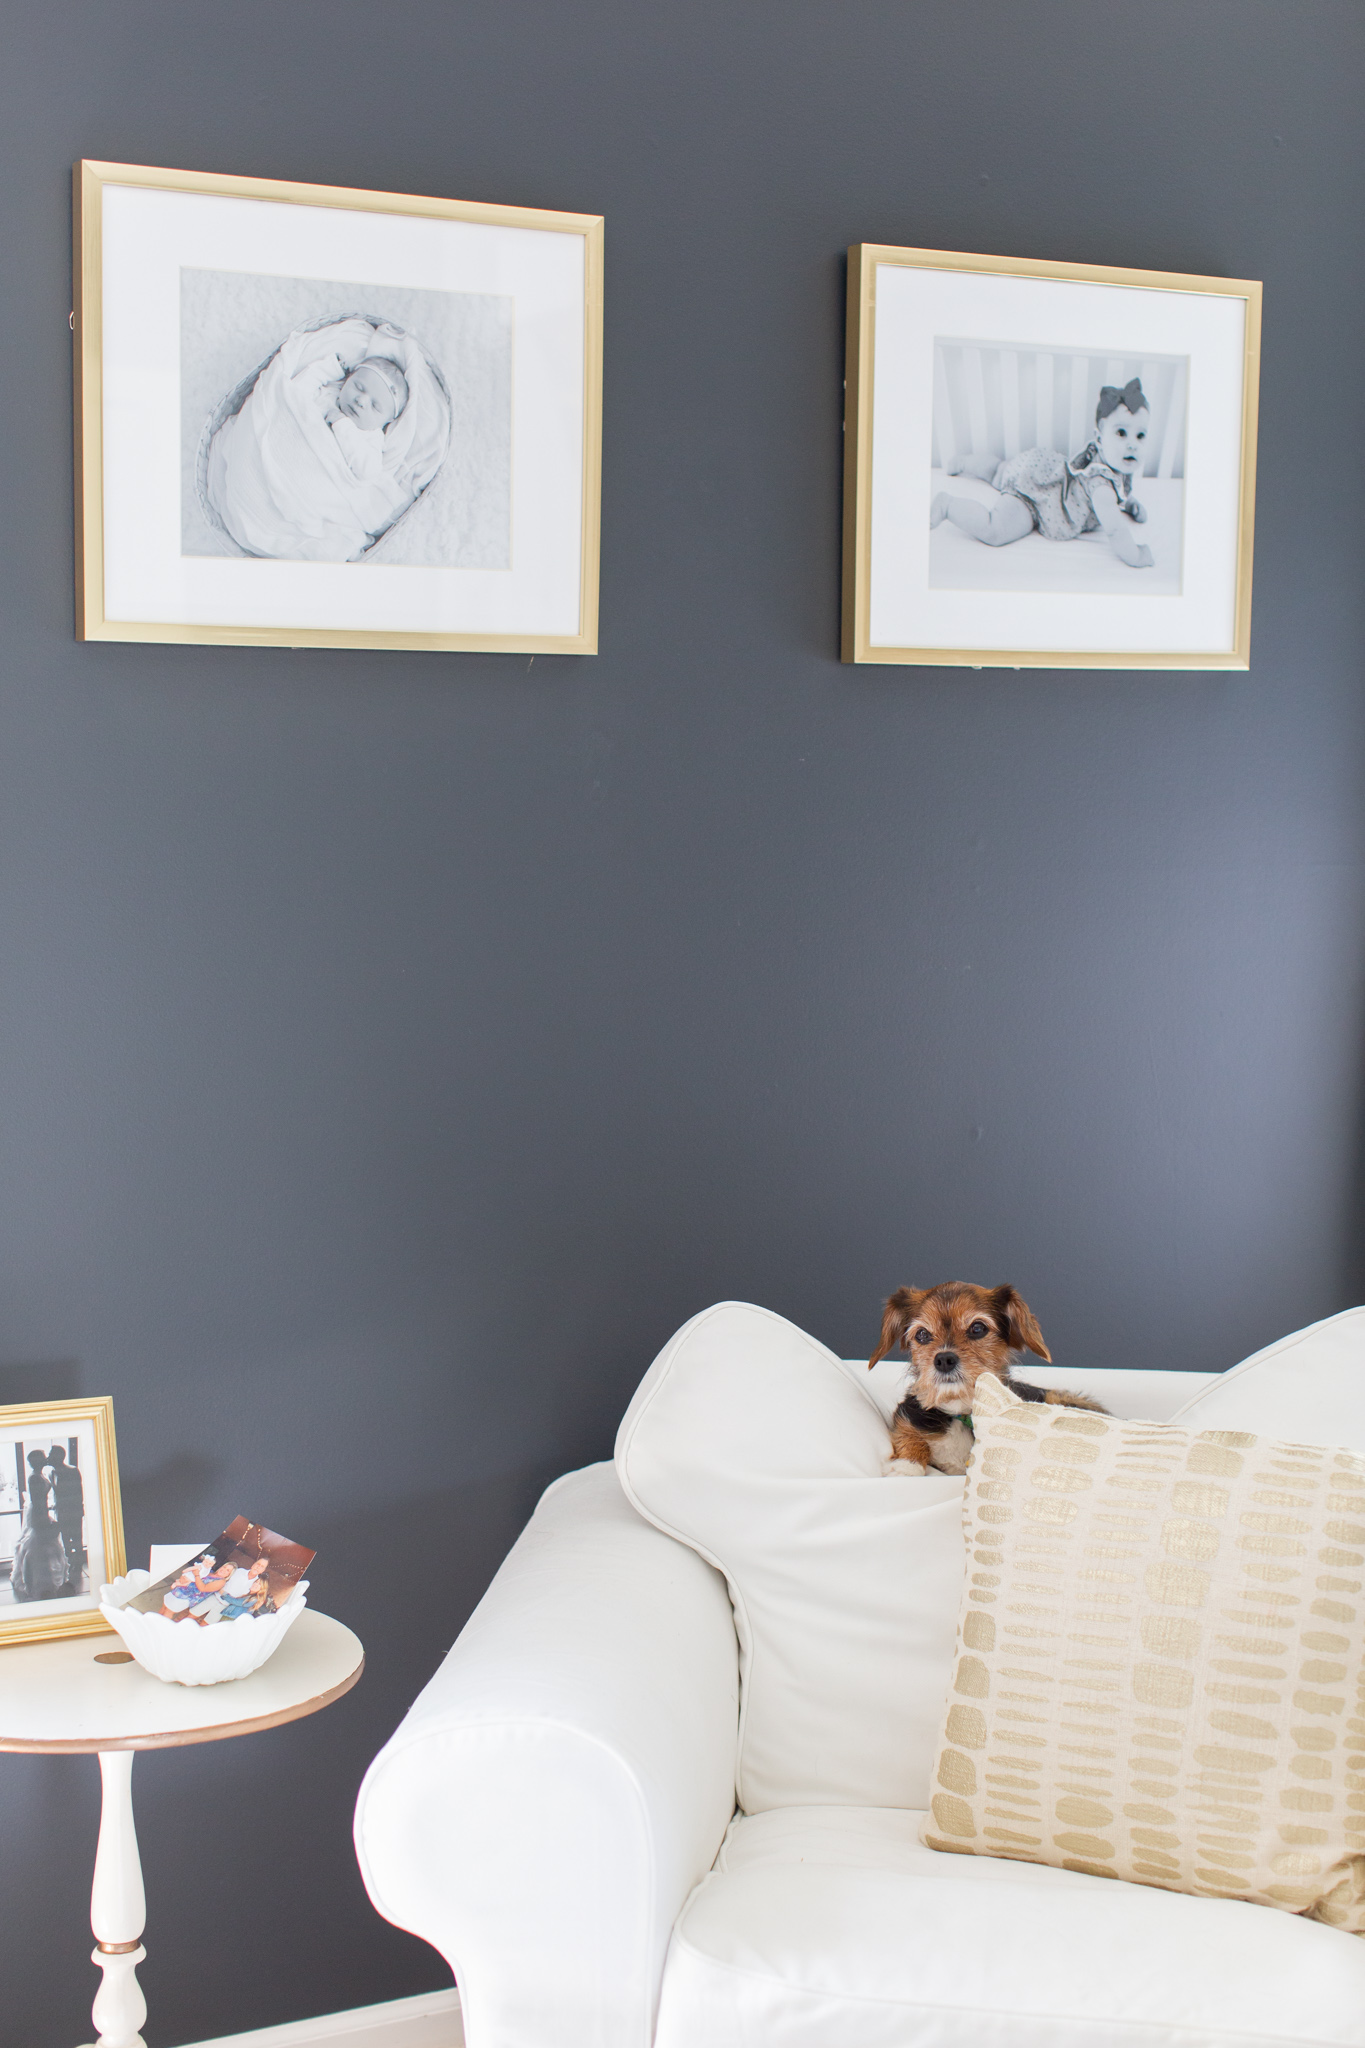 Master Bedroom Remodel Ideas by popular Ohio life and style blog, Coffee Beans and Bobby Pins: image of a master bedroom with black walls, a white fabric armchair and gold frames containing black and white baby pictures.